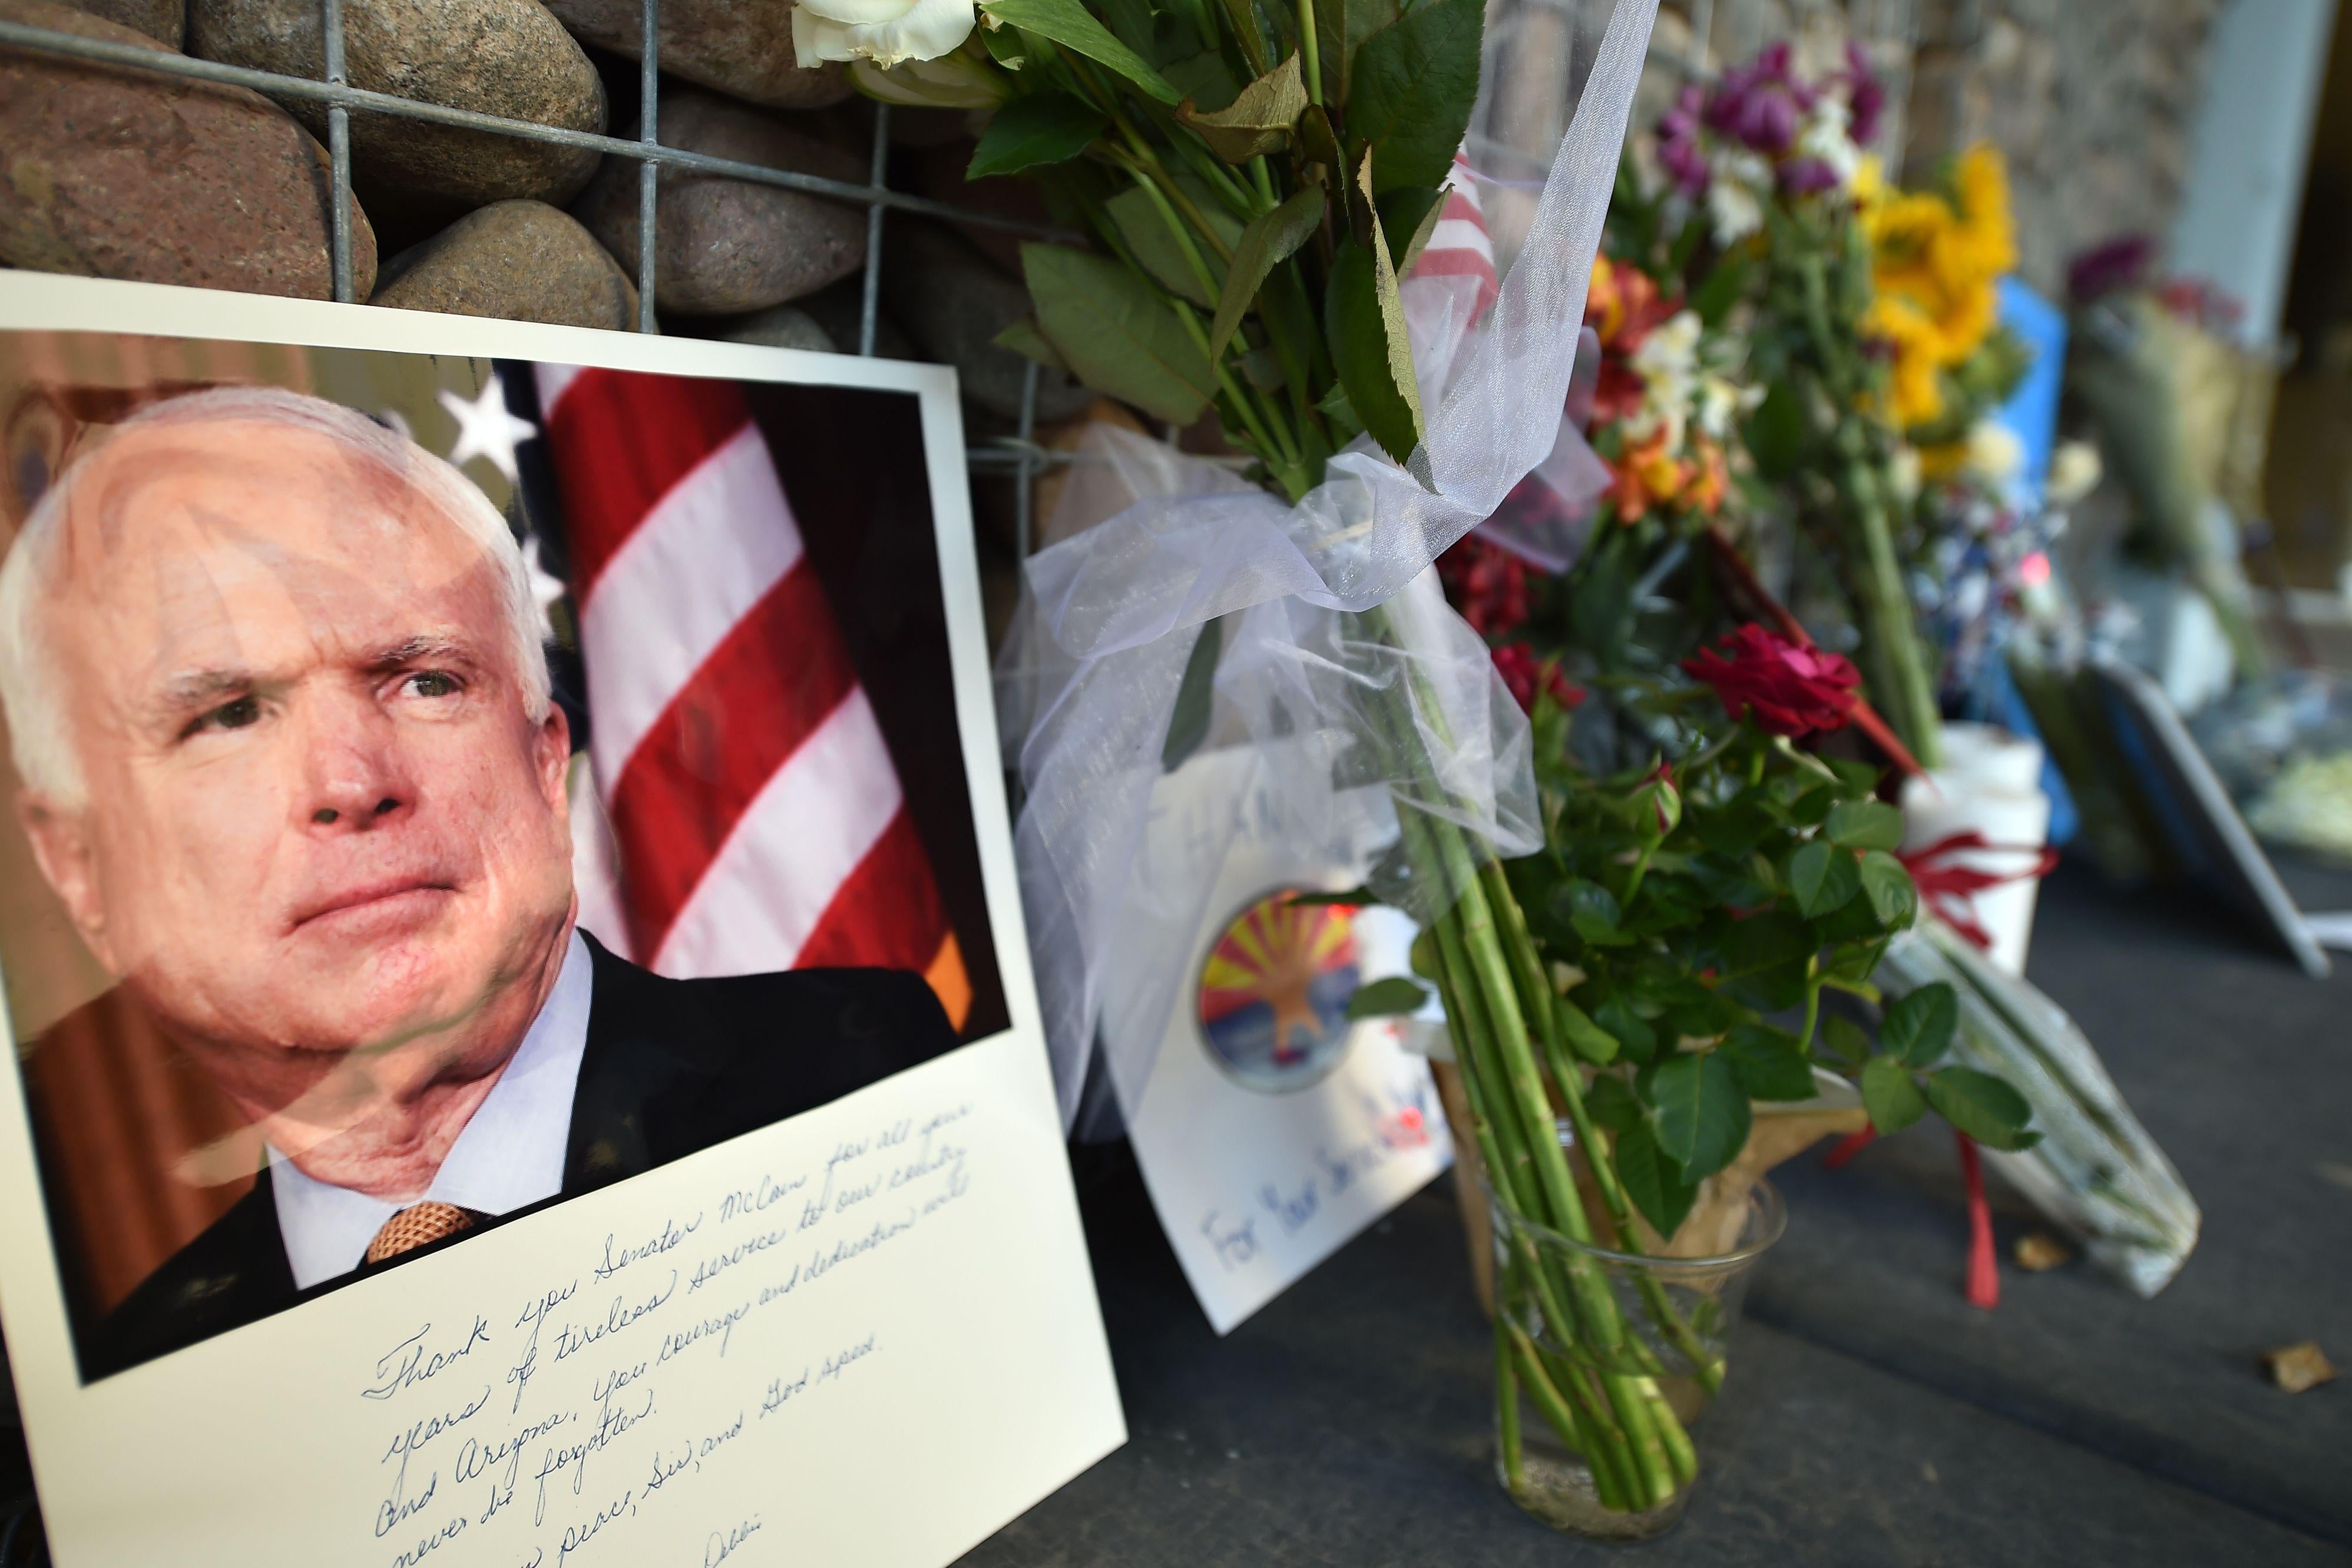 A memorial of flowers, notes, and photographs outside John McCain's Phoenix office.